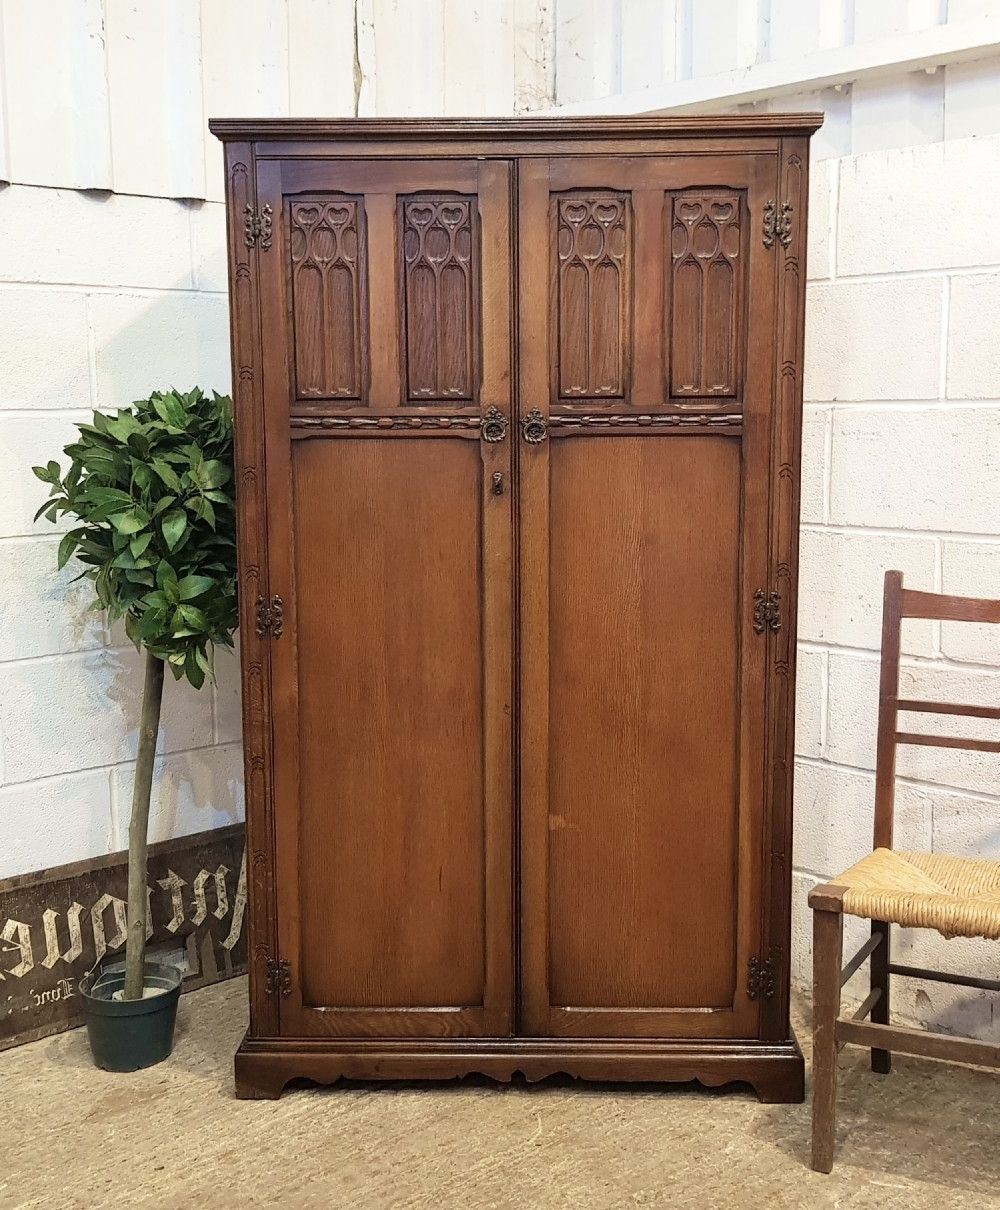 Antique Carved Oak Tallboy Wardrobe C1920 | 803573 |  Www.castleforgeantiques.co.uk Throughout Small Tallboy Wardrobes (Gallery 17 of 20)